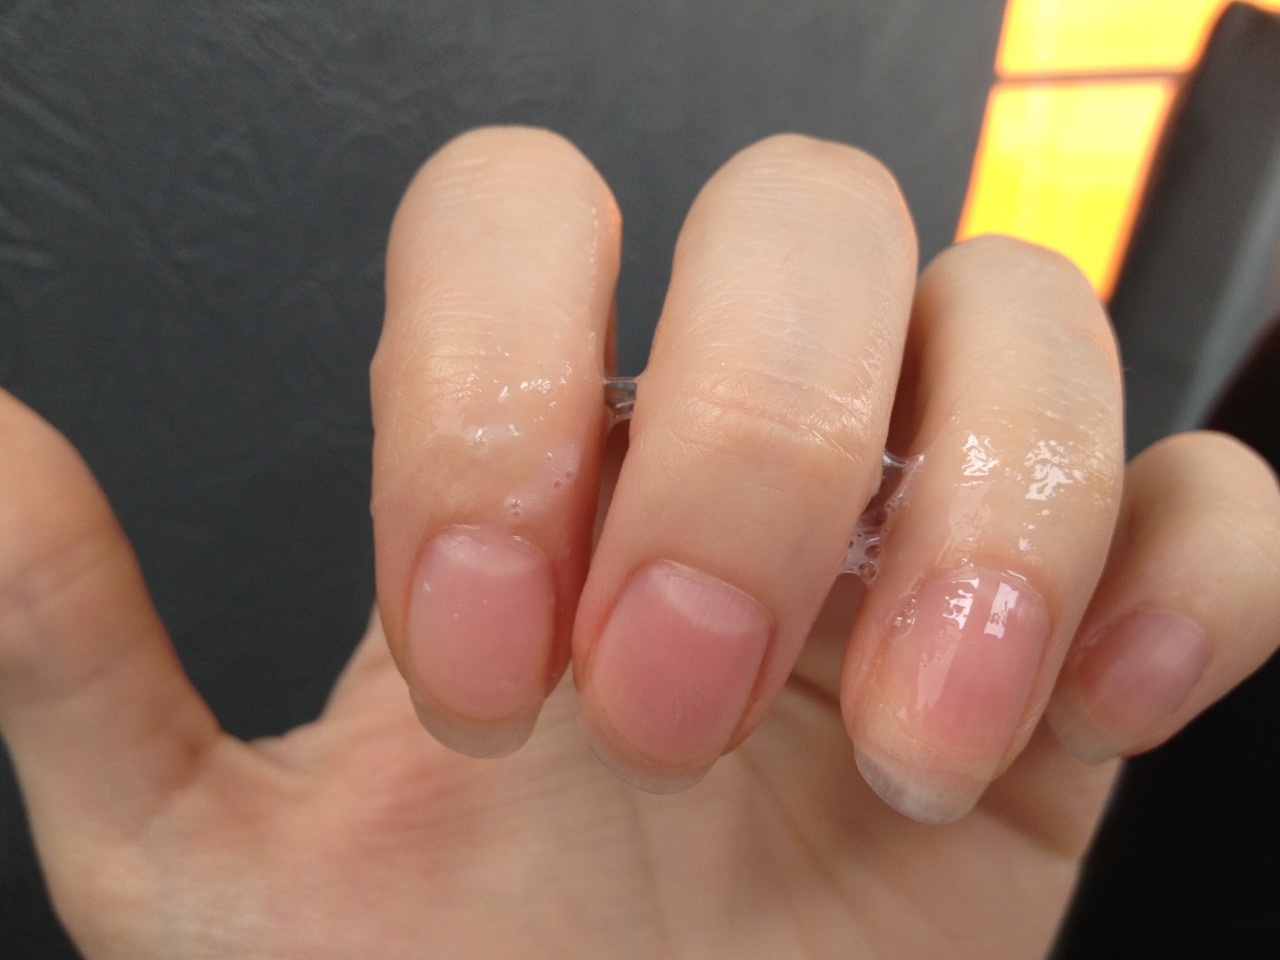 tightwetcindy:  My wet, little pussy, and my fingers after playing  Well this got